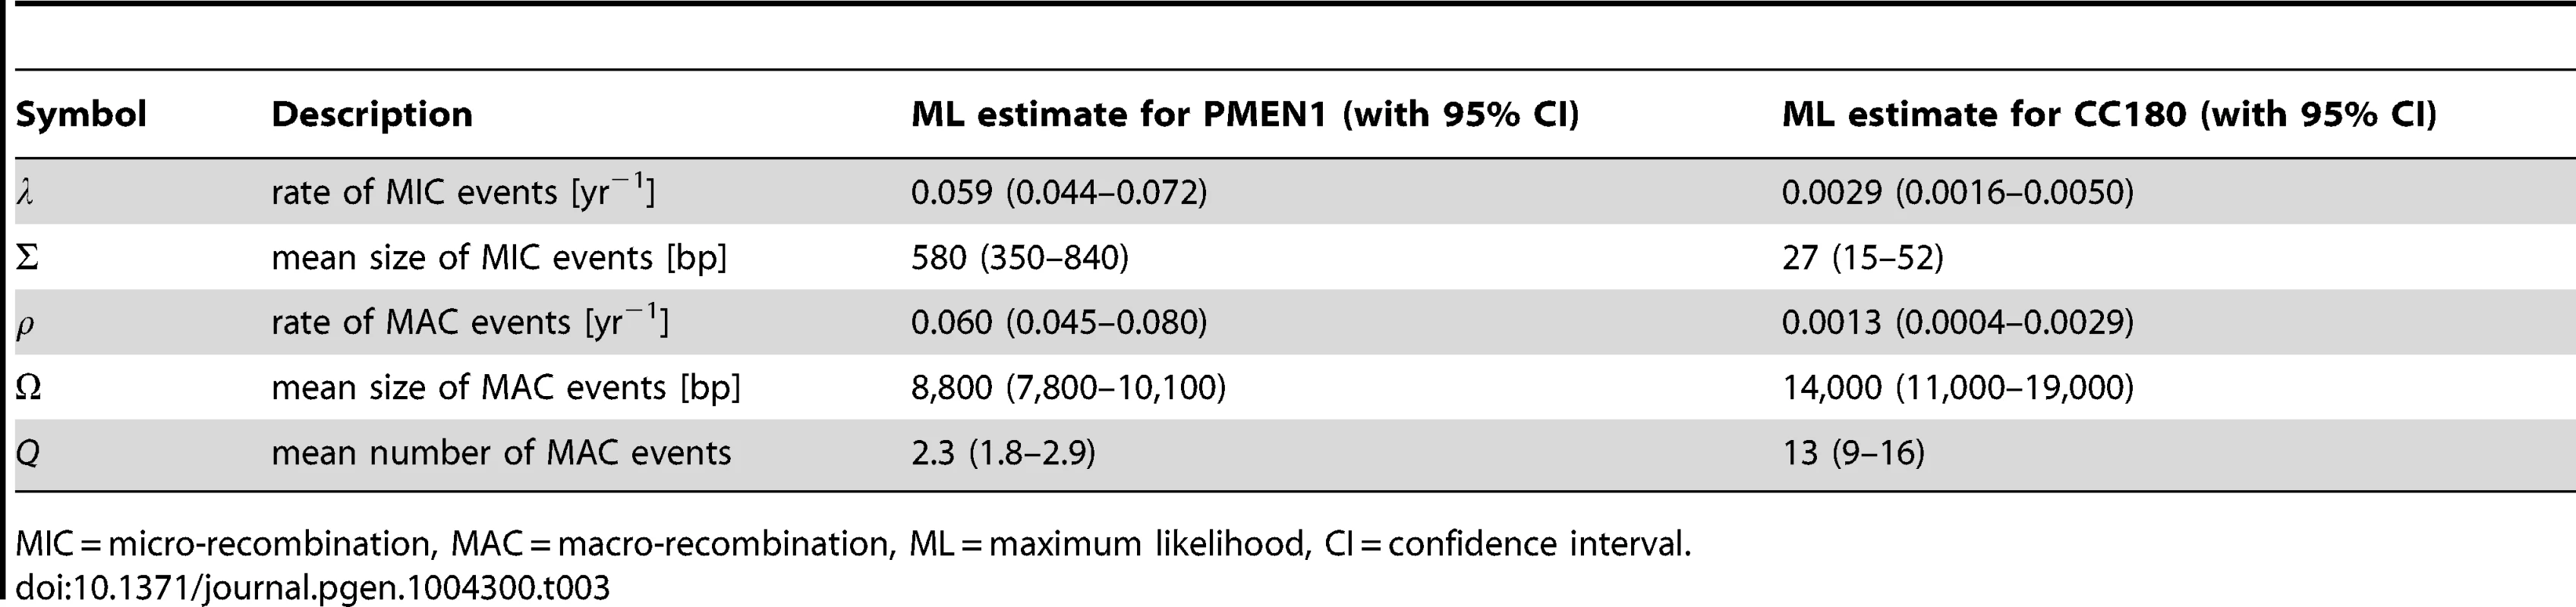 Best fit parameters for the mixture model with micro- and macro-recombination (Model 3) with 95% confidence intervals.